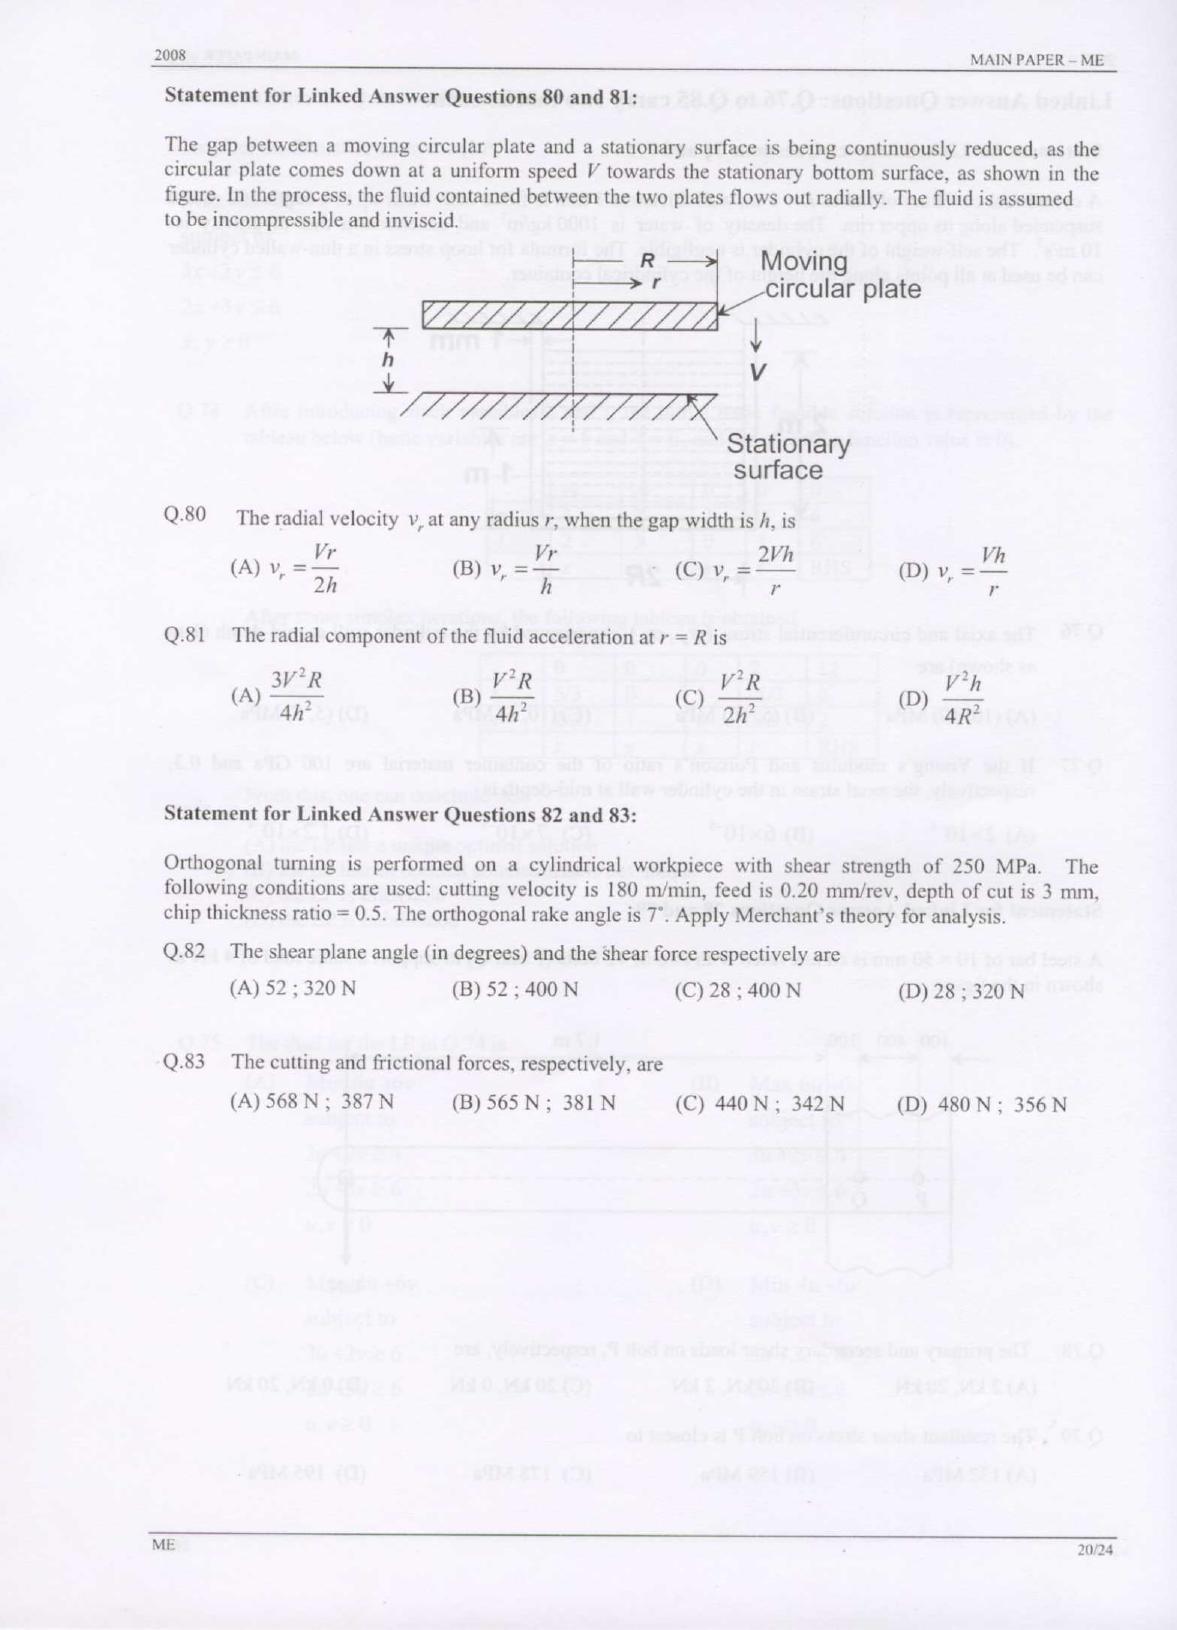 GATE 2008 Mechanical Engineering (ME) Question Paper with Answer Key - Page 20